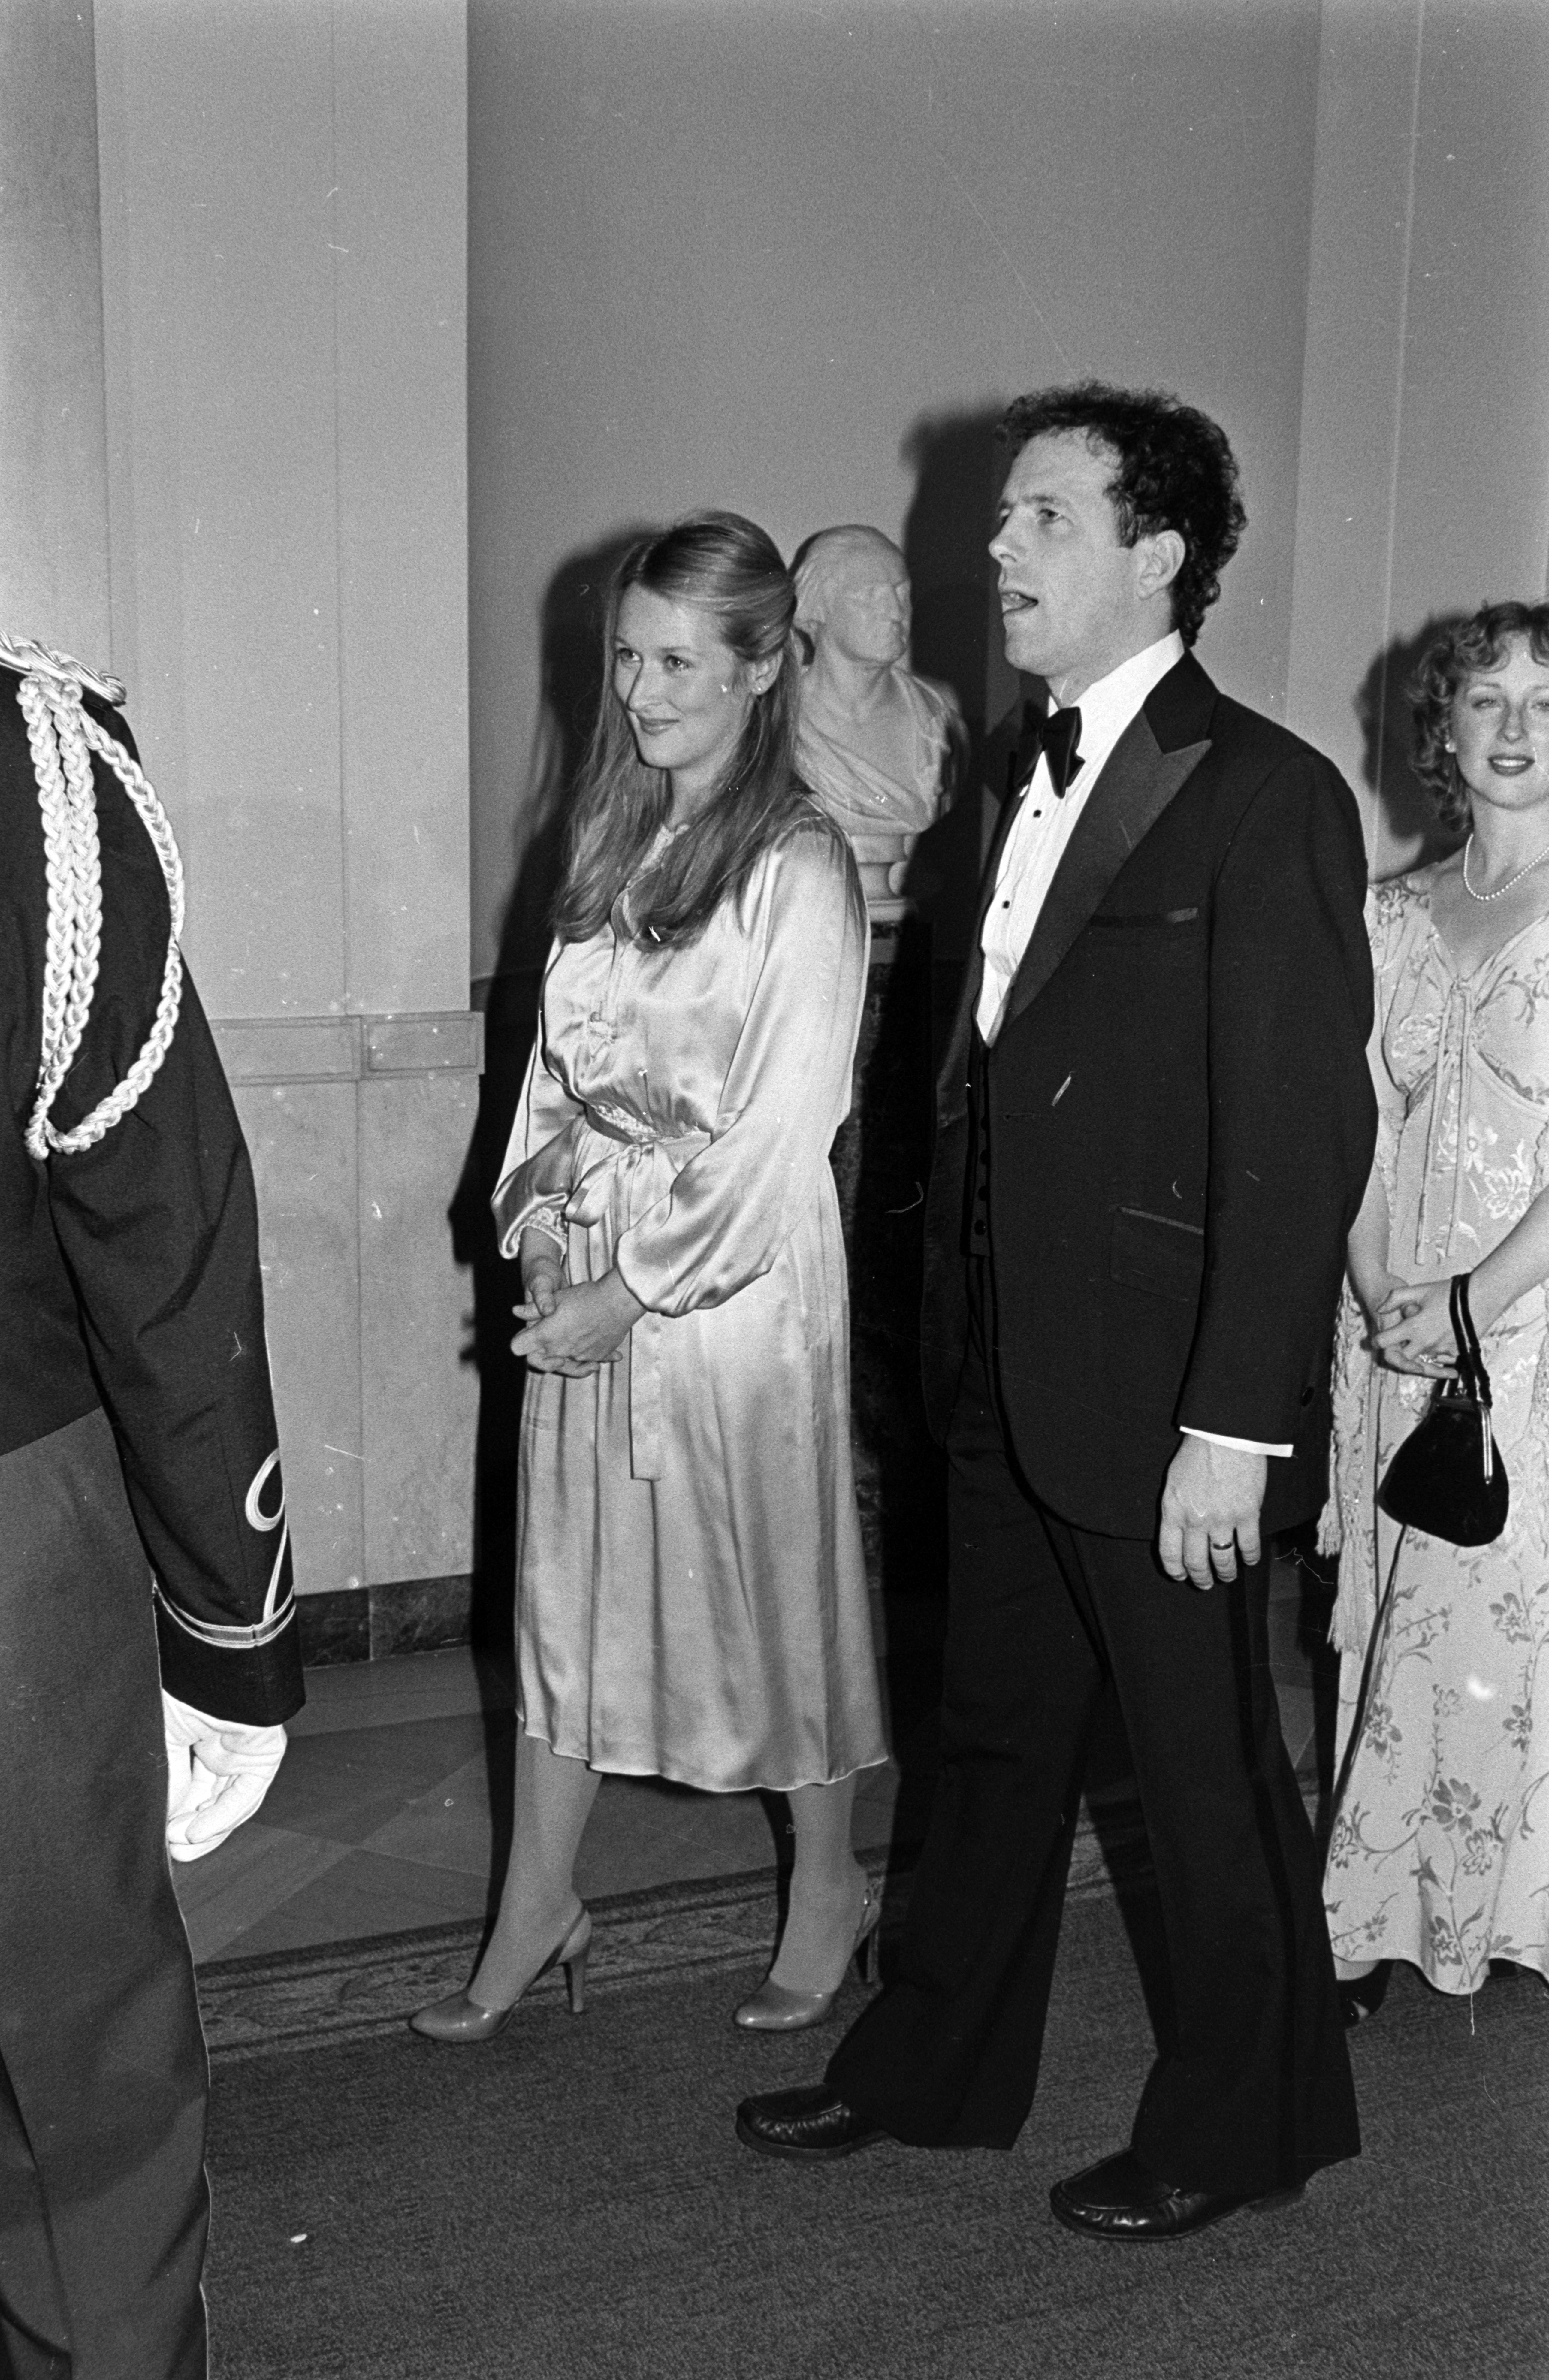 Meryl Streep and Don Gummer attend a White House event in Washington, D.C., on December 2, 1979.